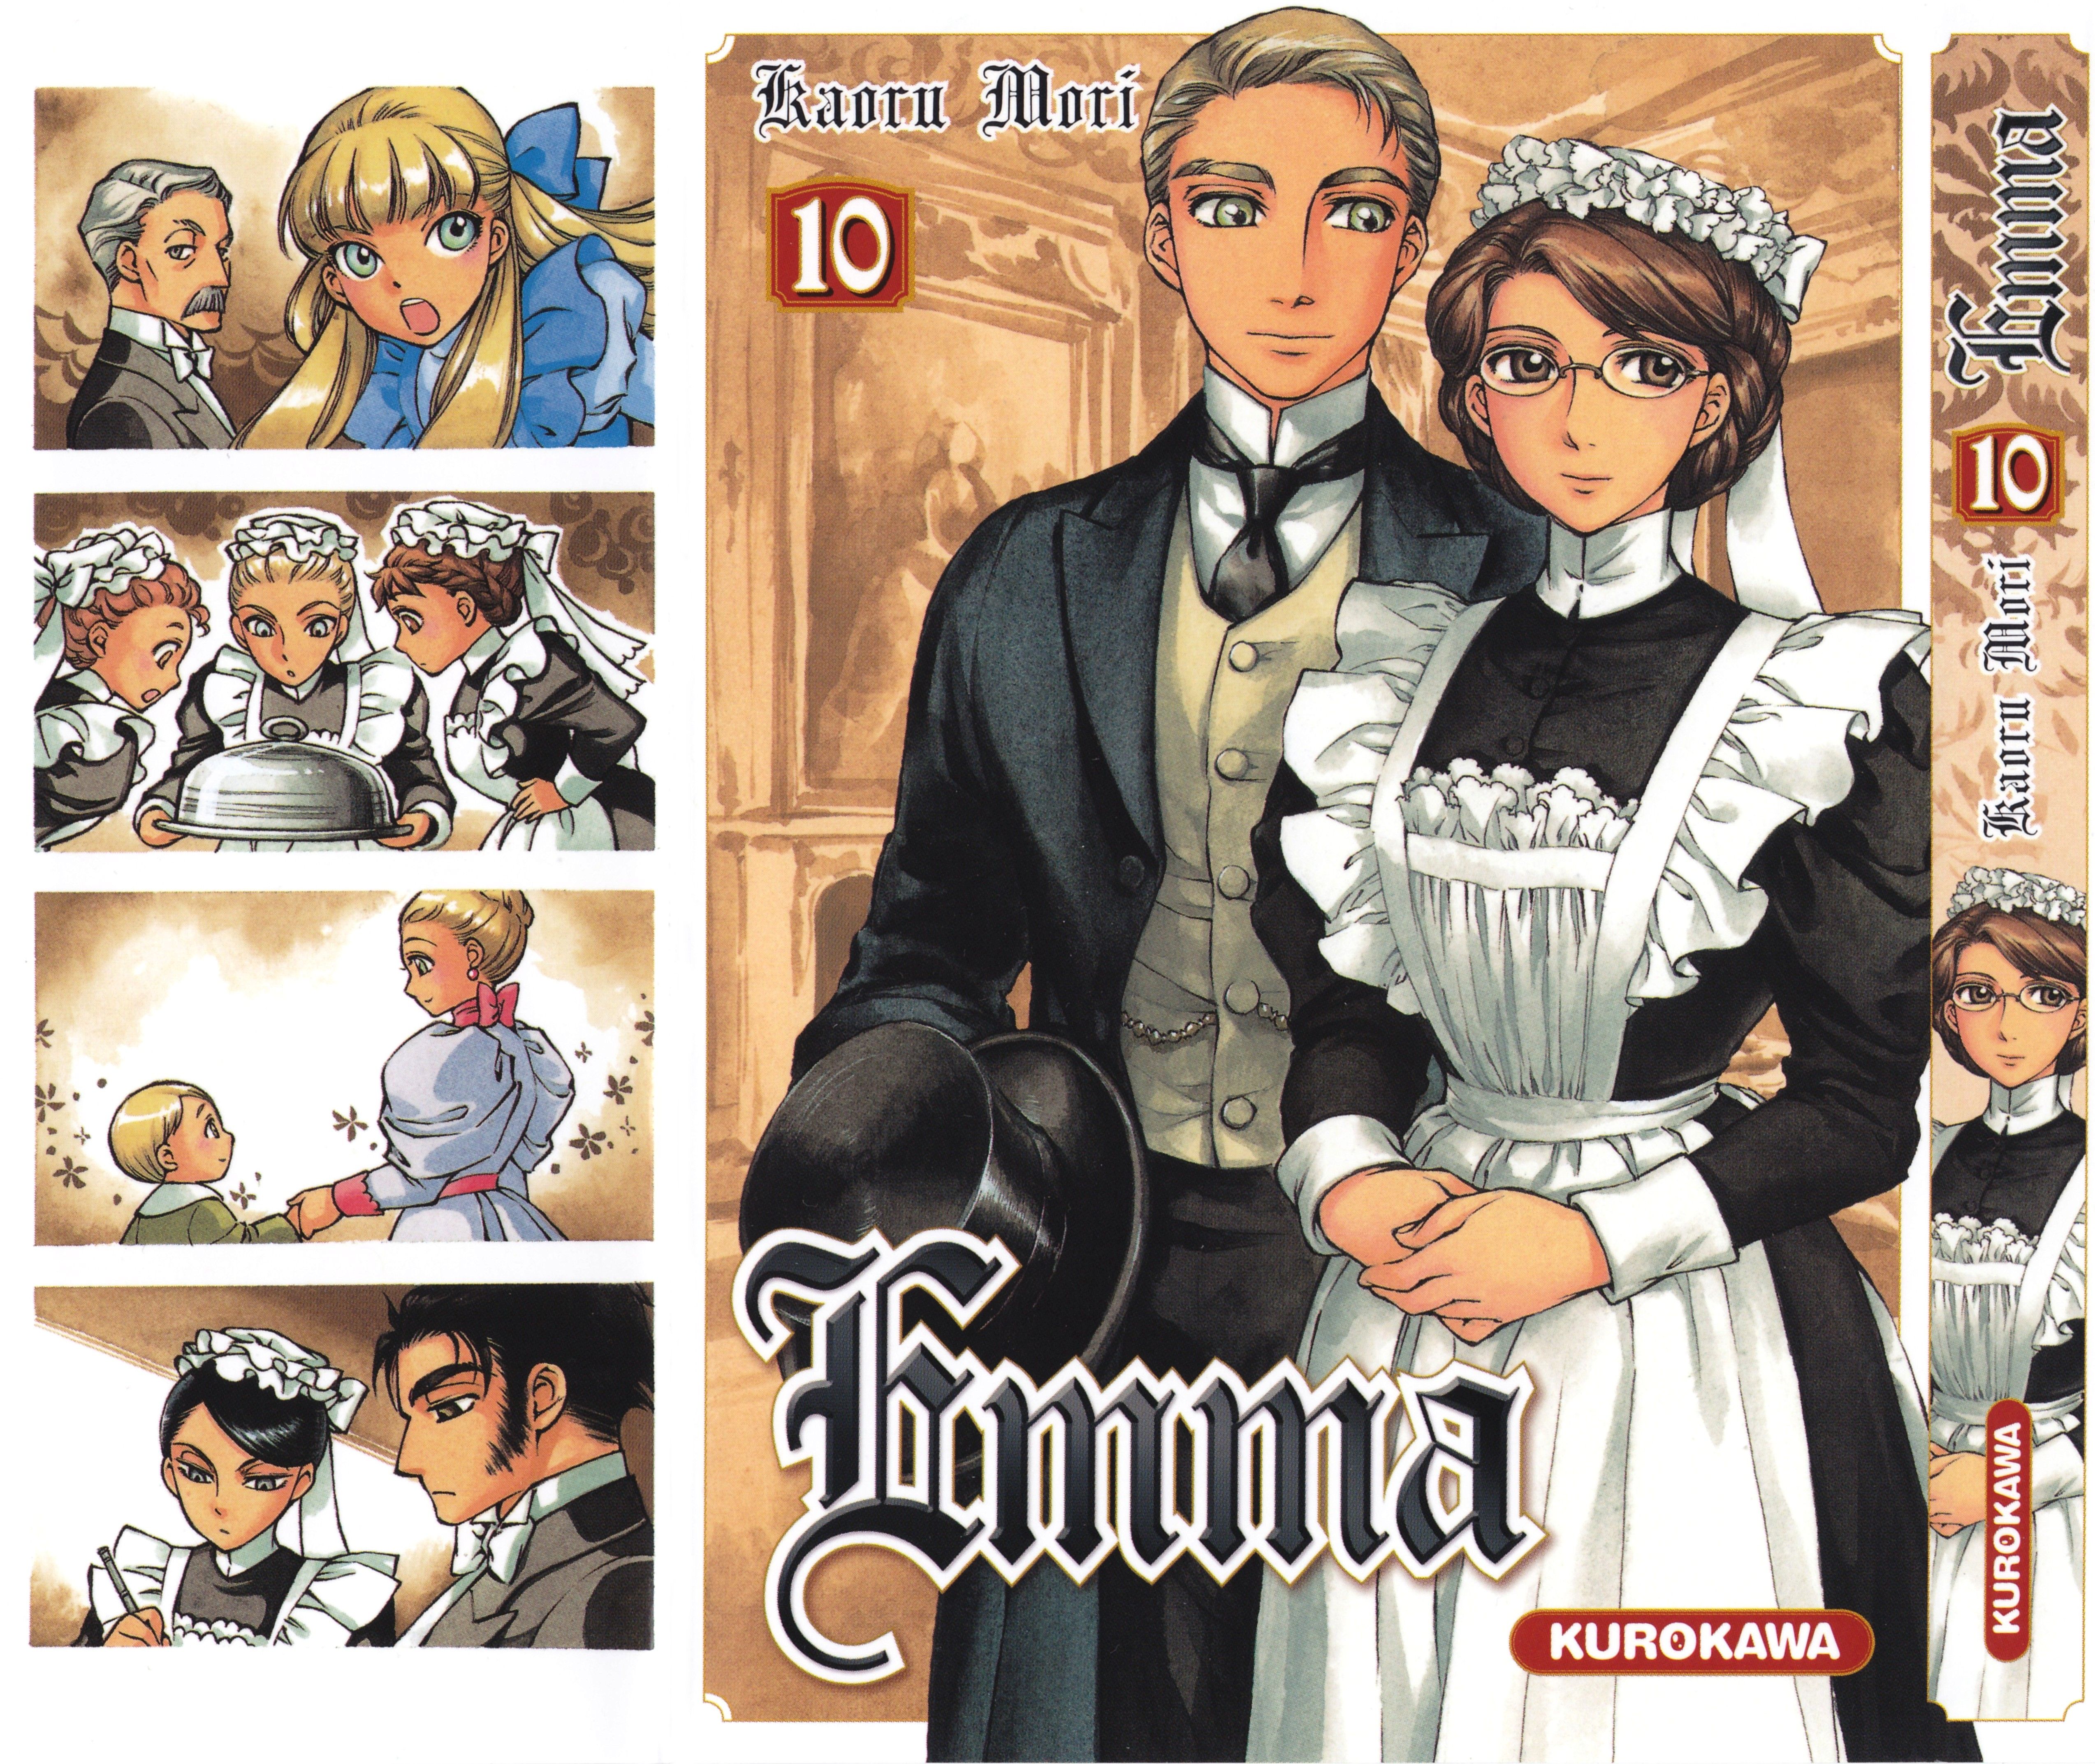 Victorian Romance Emma and Scan Gallery